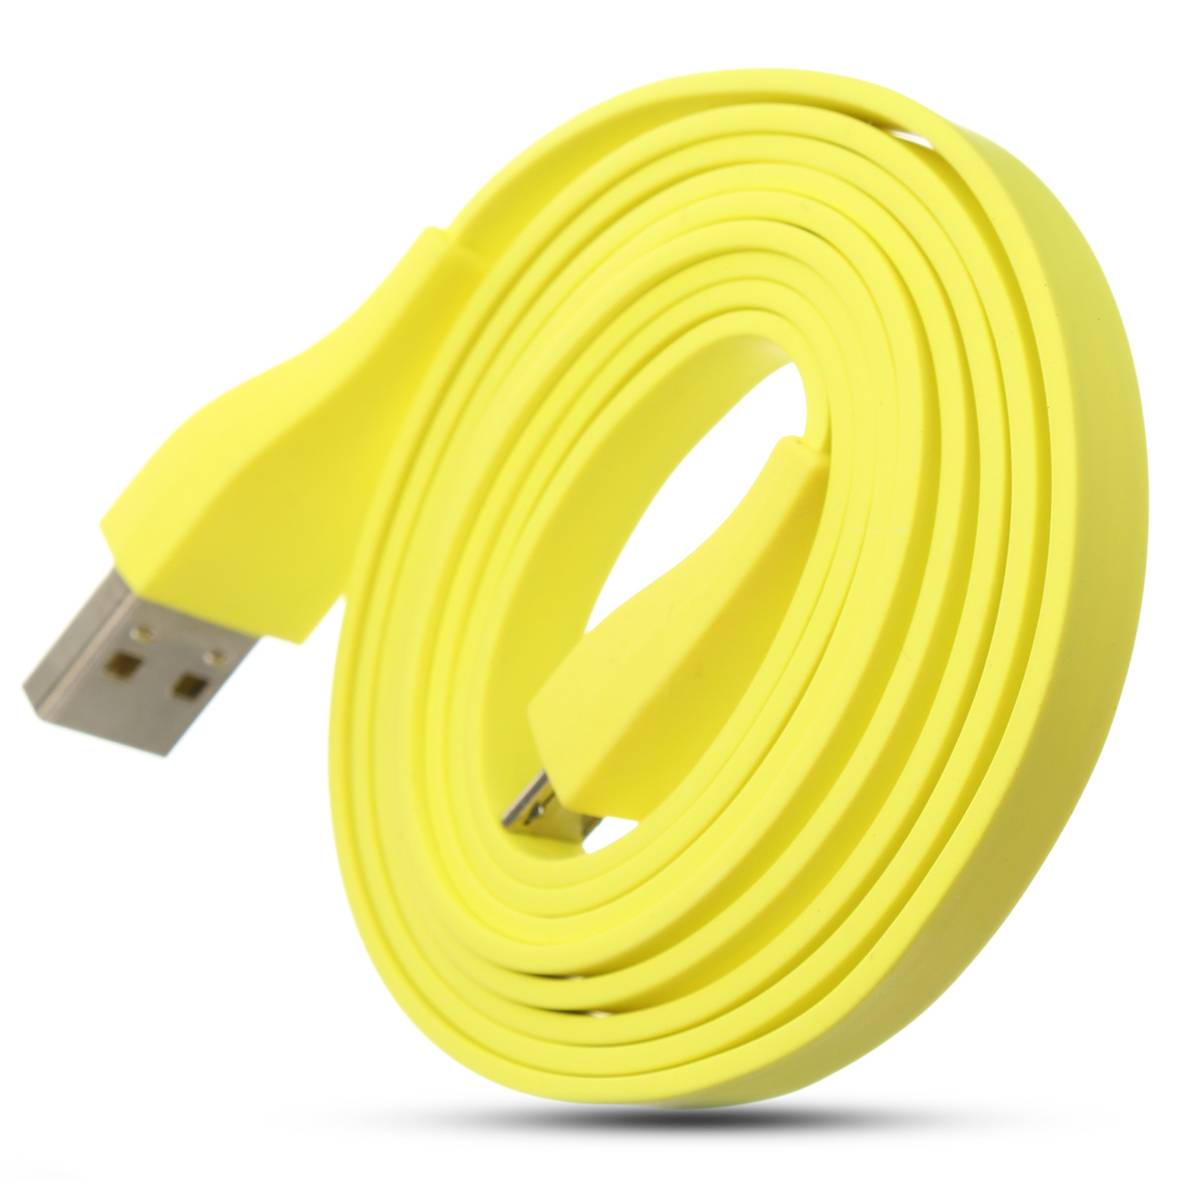 1.2M Micro USB PC Charger Flexible Cable for Logitech UE MEGABOOM Bluetooth SpeakerData Transfer USB Extension Cord